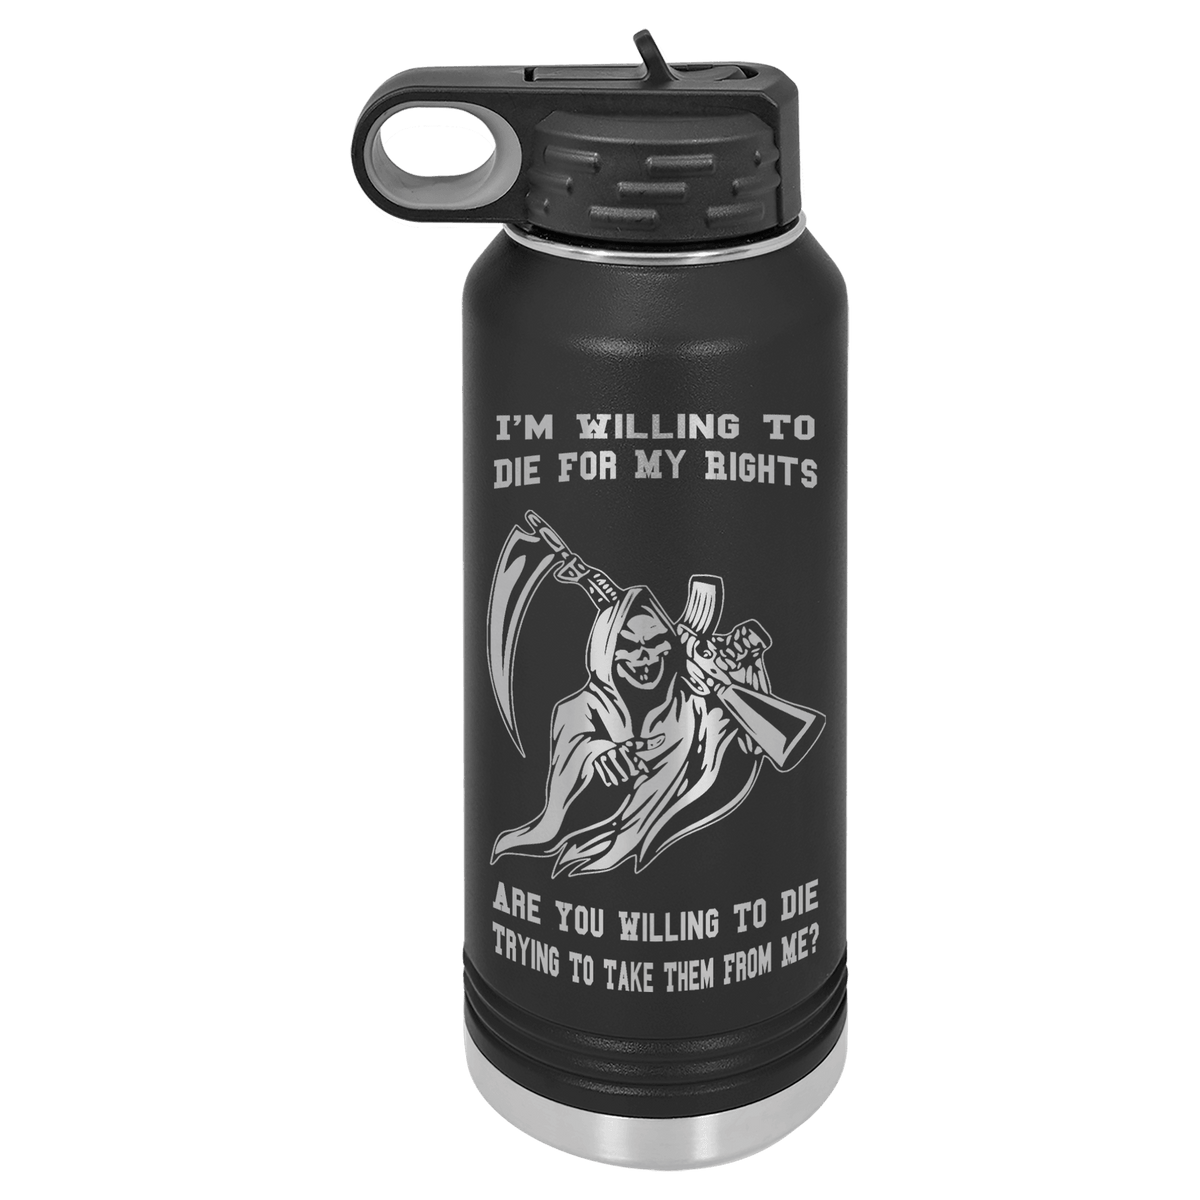 Designs by MyUtopia Shout Out:I'm Willing To Die for My Rights, Are You Willing to Die Taking Them? 32 oz Polar Camel Water Bottle - Stainless Steel,32oz / Black,Polar Camel - 32oz Water Bottle